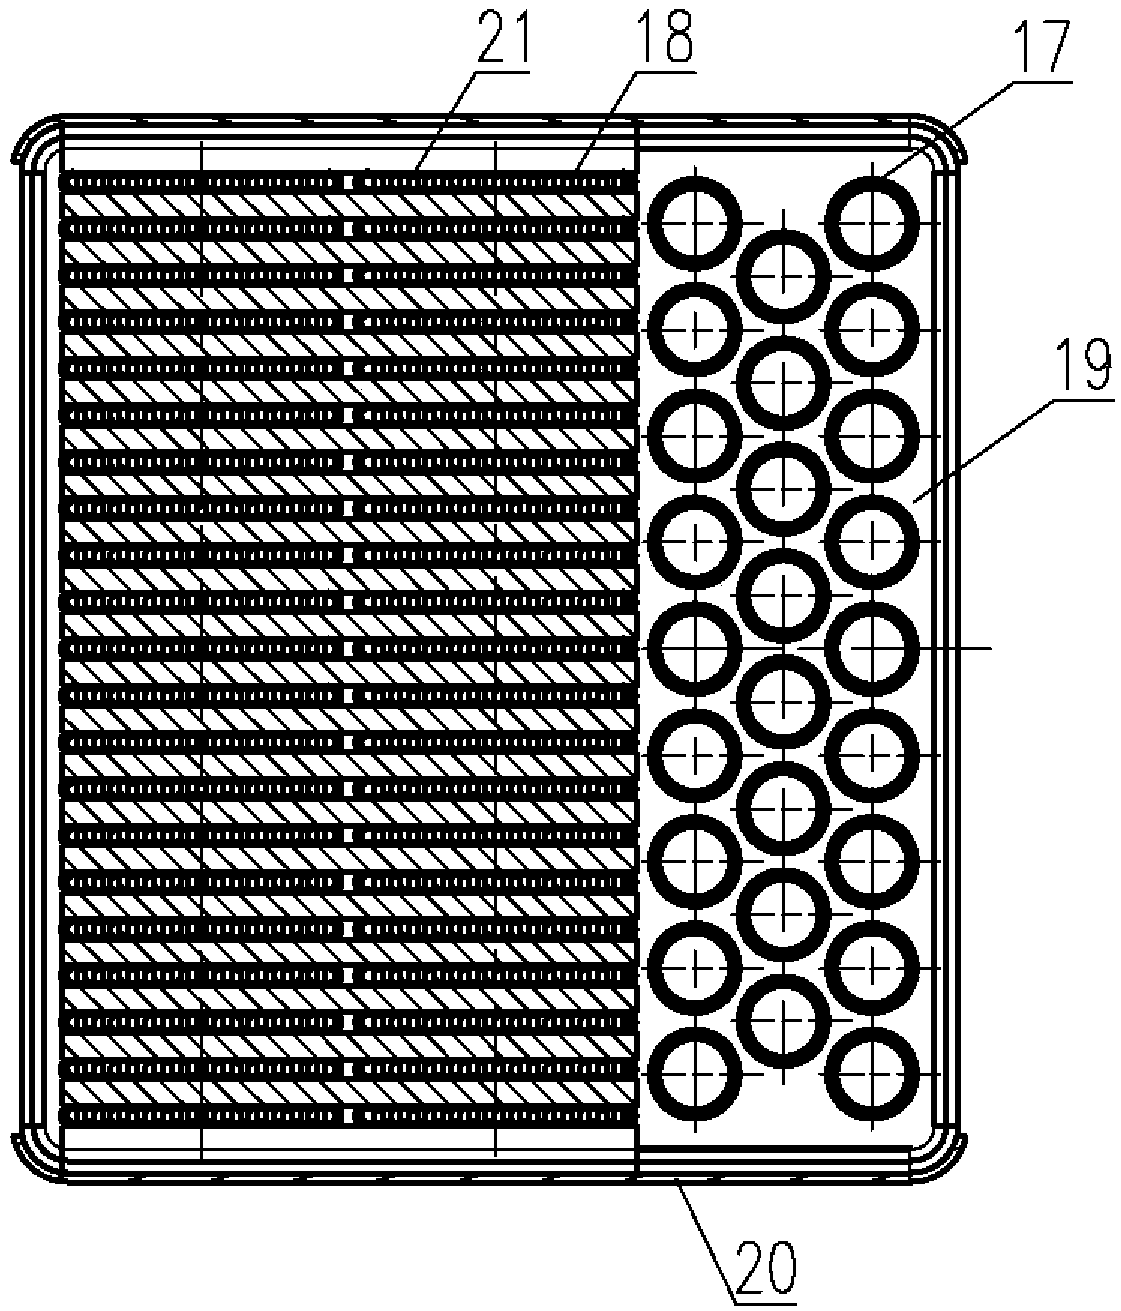 A heat exchange device for utilization of combustion waste heat with grid-distributed heat exchange structure